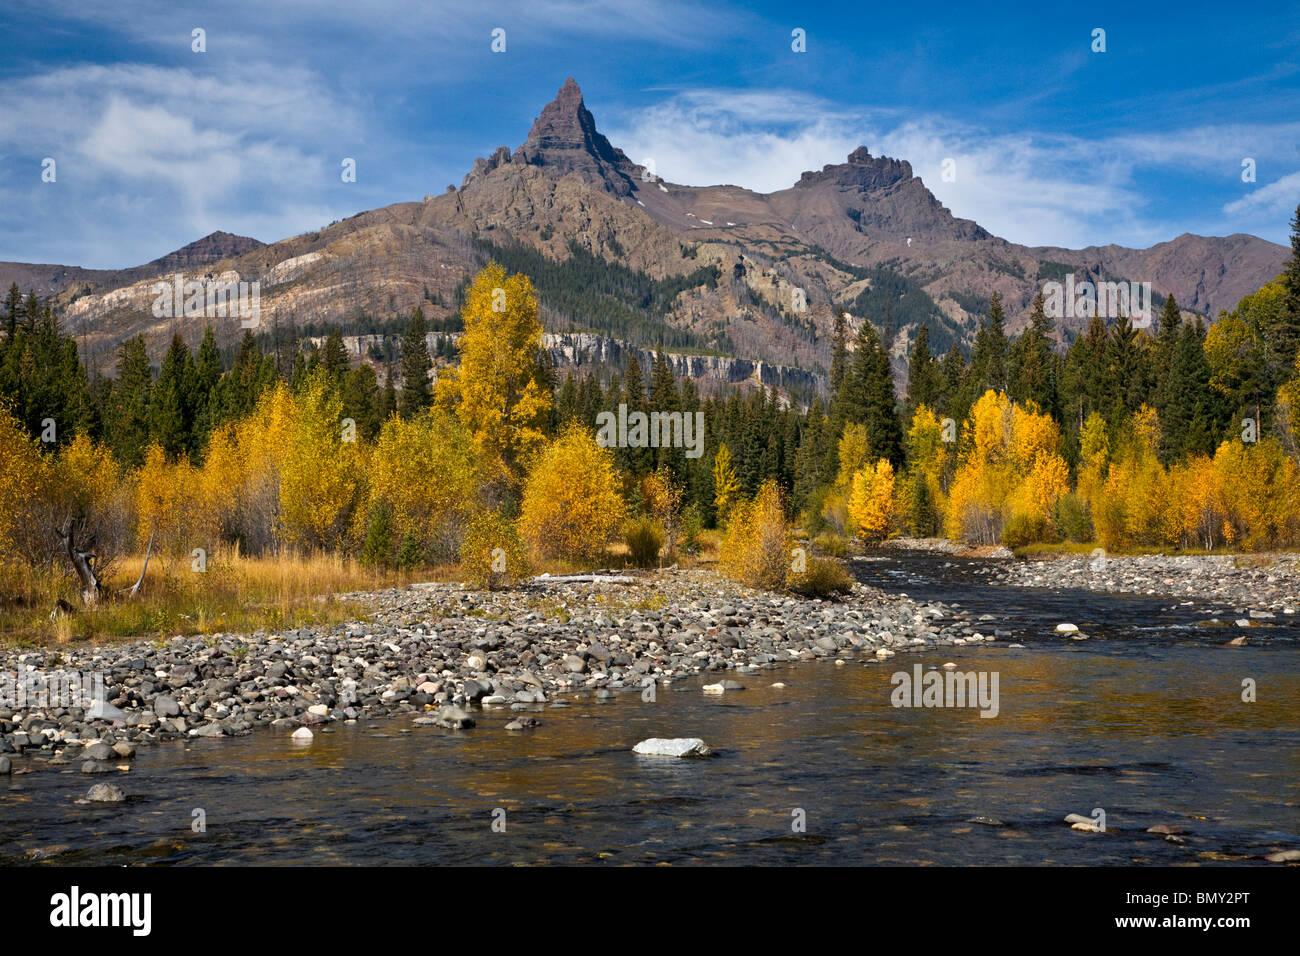 Shoshone National Forest, WY View of Pilot peak and from along the Clark's Fork River with fall colored cottonwoods Stock Photo